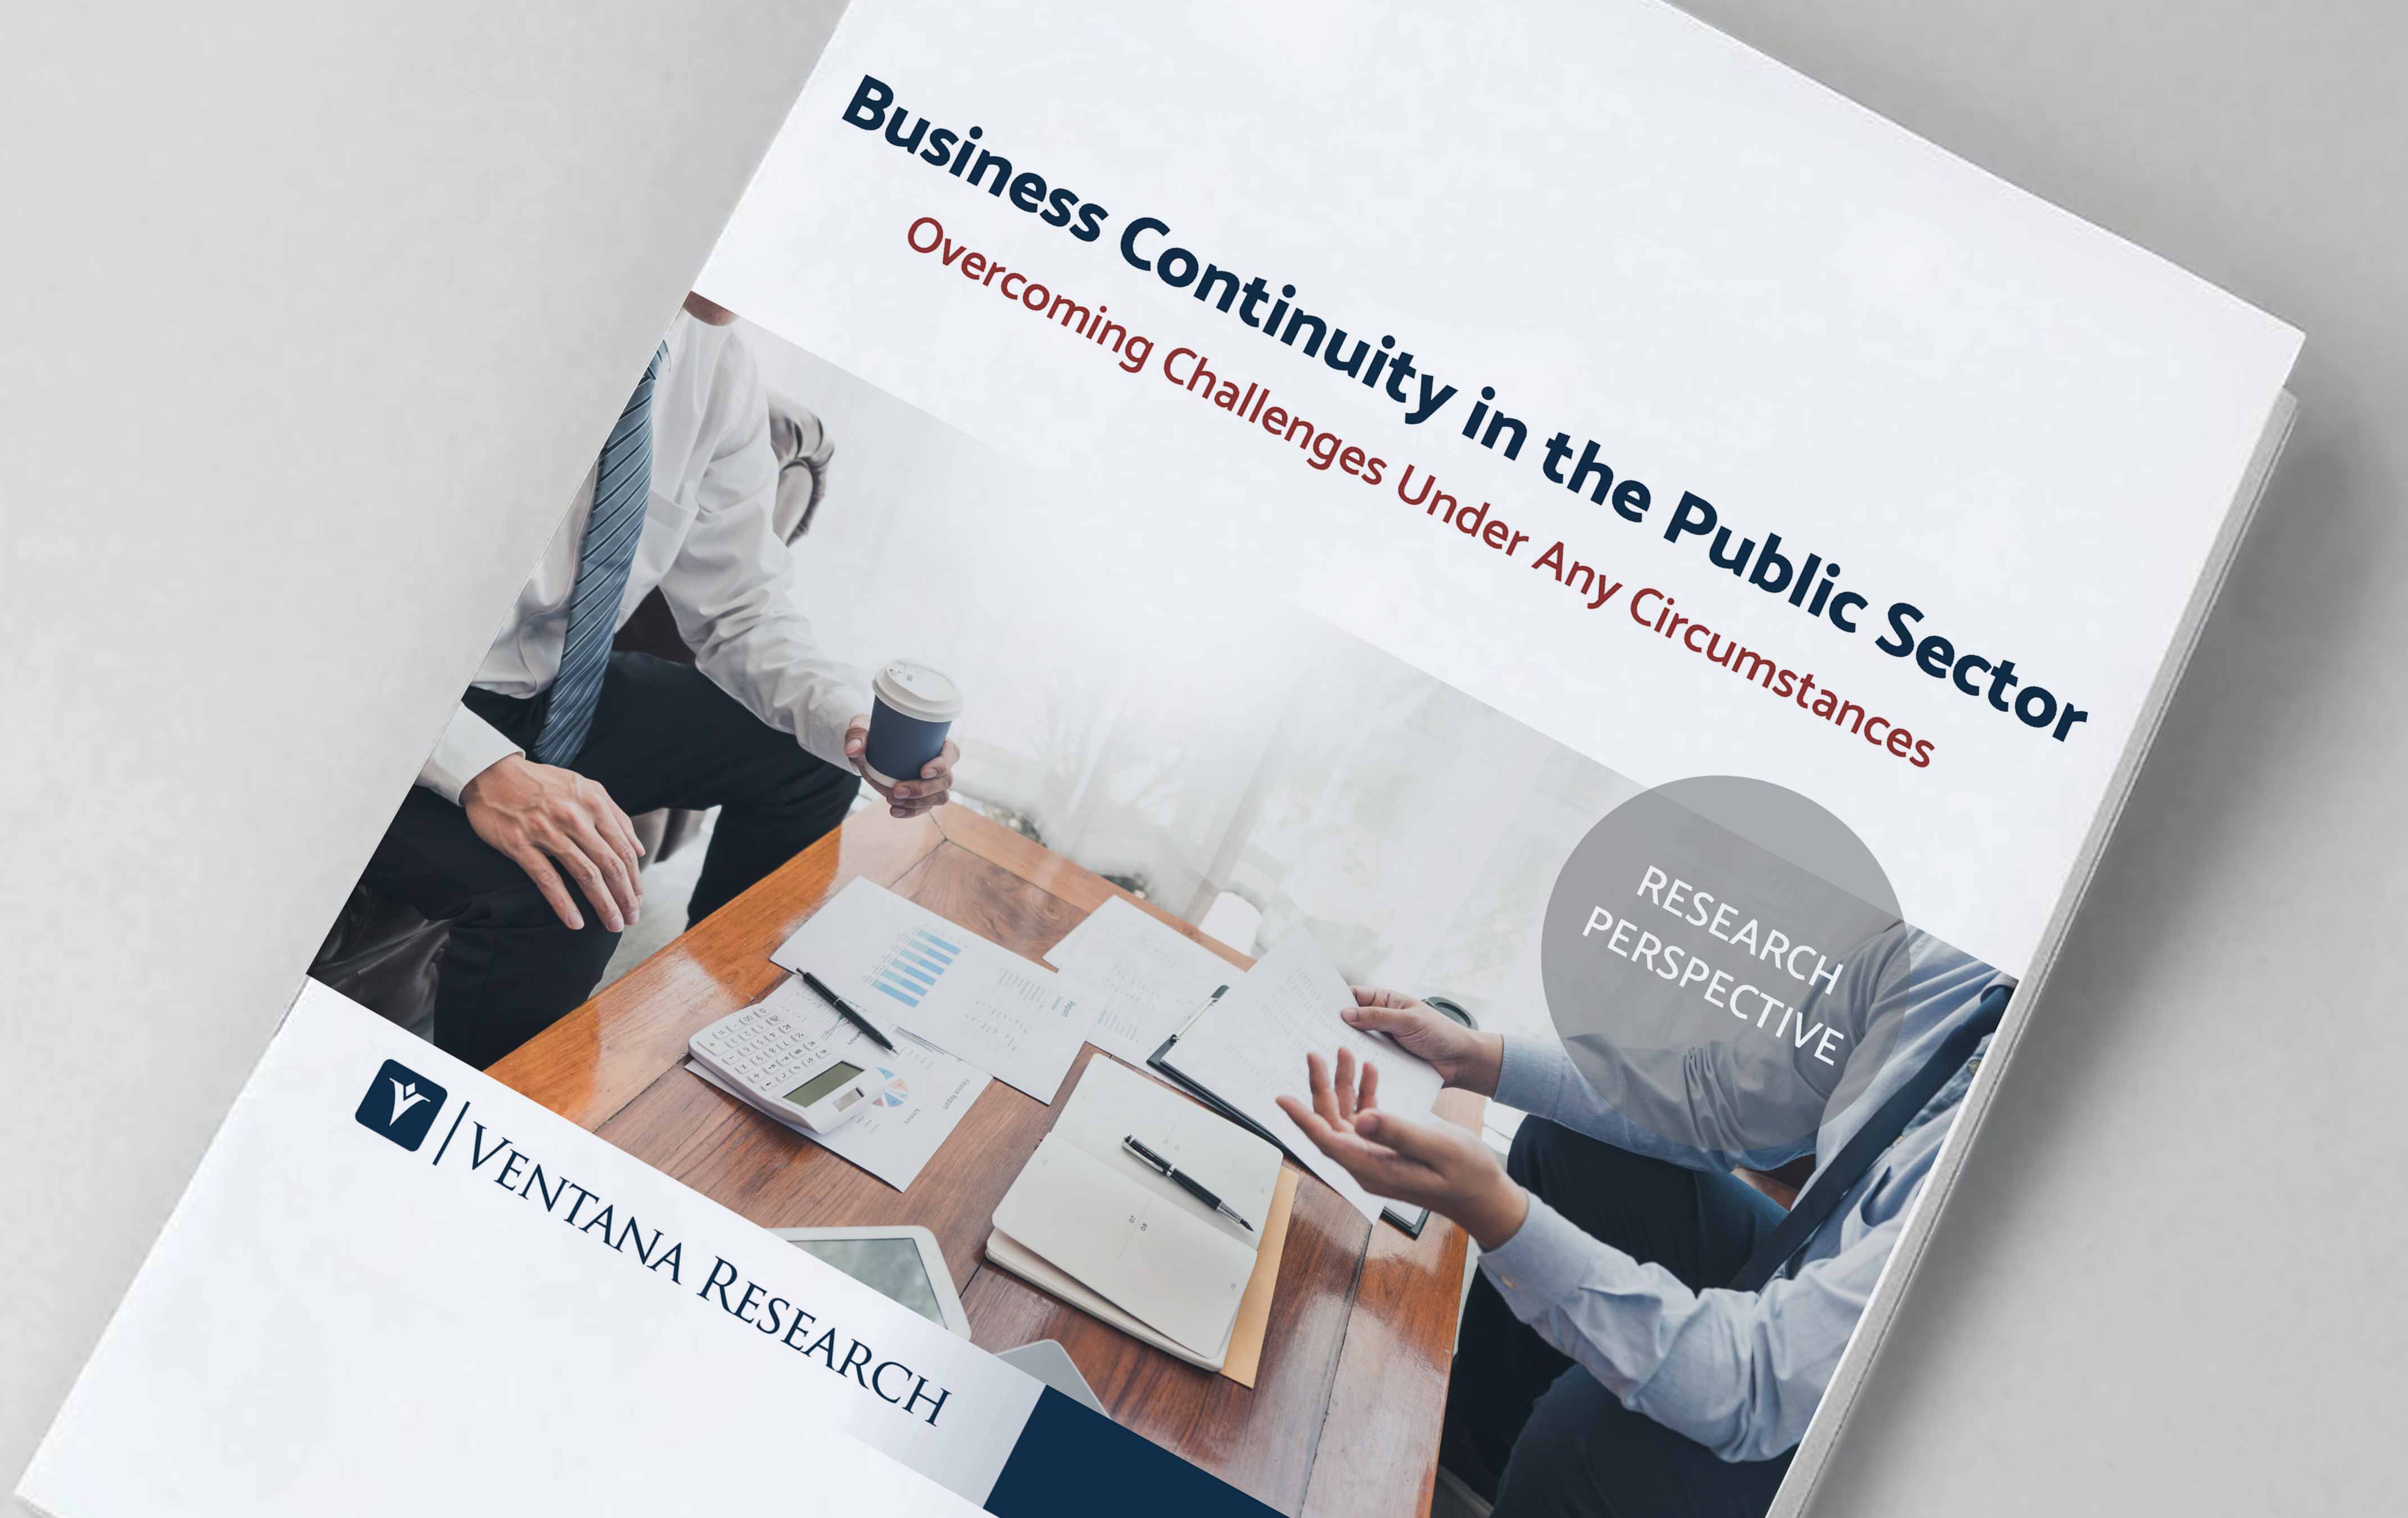 Thumbnail image of Ventana Research paper on Public Sector Business Continuity